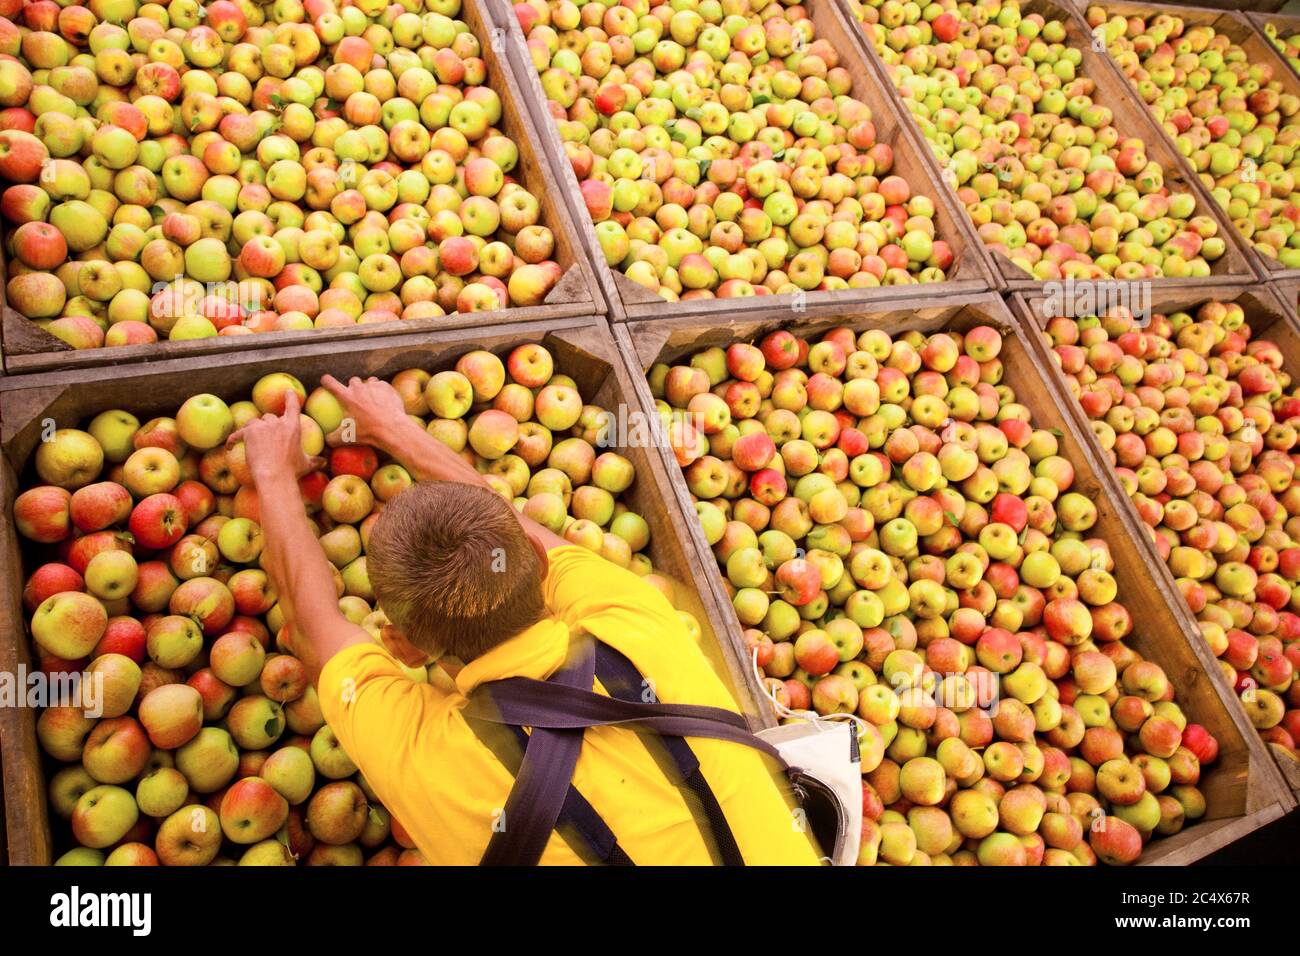 Poland is third largest apple producer in the world. Here: Harvesting of apples in a fruit orchard family company. Photo CTK/Grzegorz Klatka Stock Photo